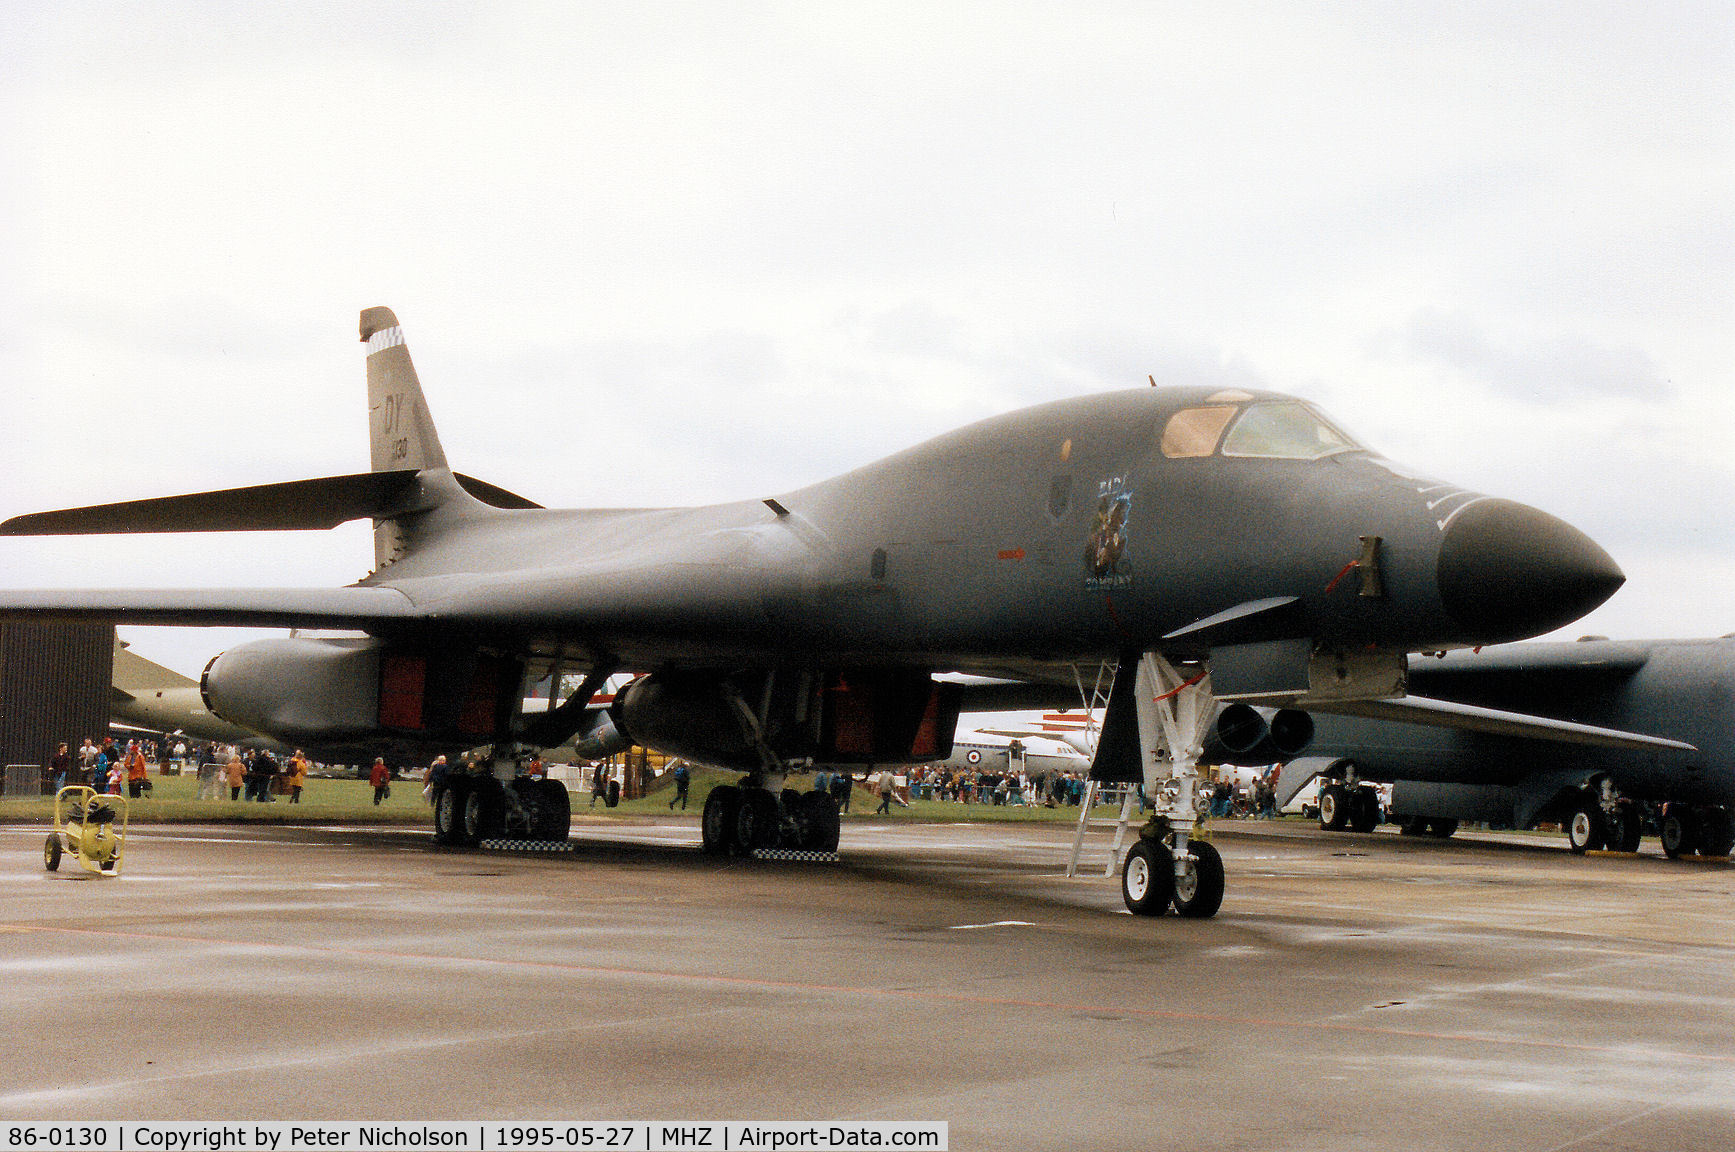 86-0130, 1986 Rockwell B-1B Lancer C/N 90, Another view of the B-1B Lancer, callsign Hawk 87, from Dyess AFB on display at the 1995 RAF Mildenhall Air Fete.